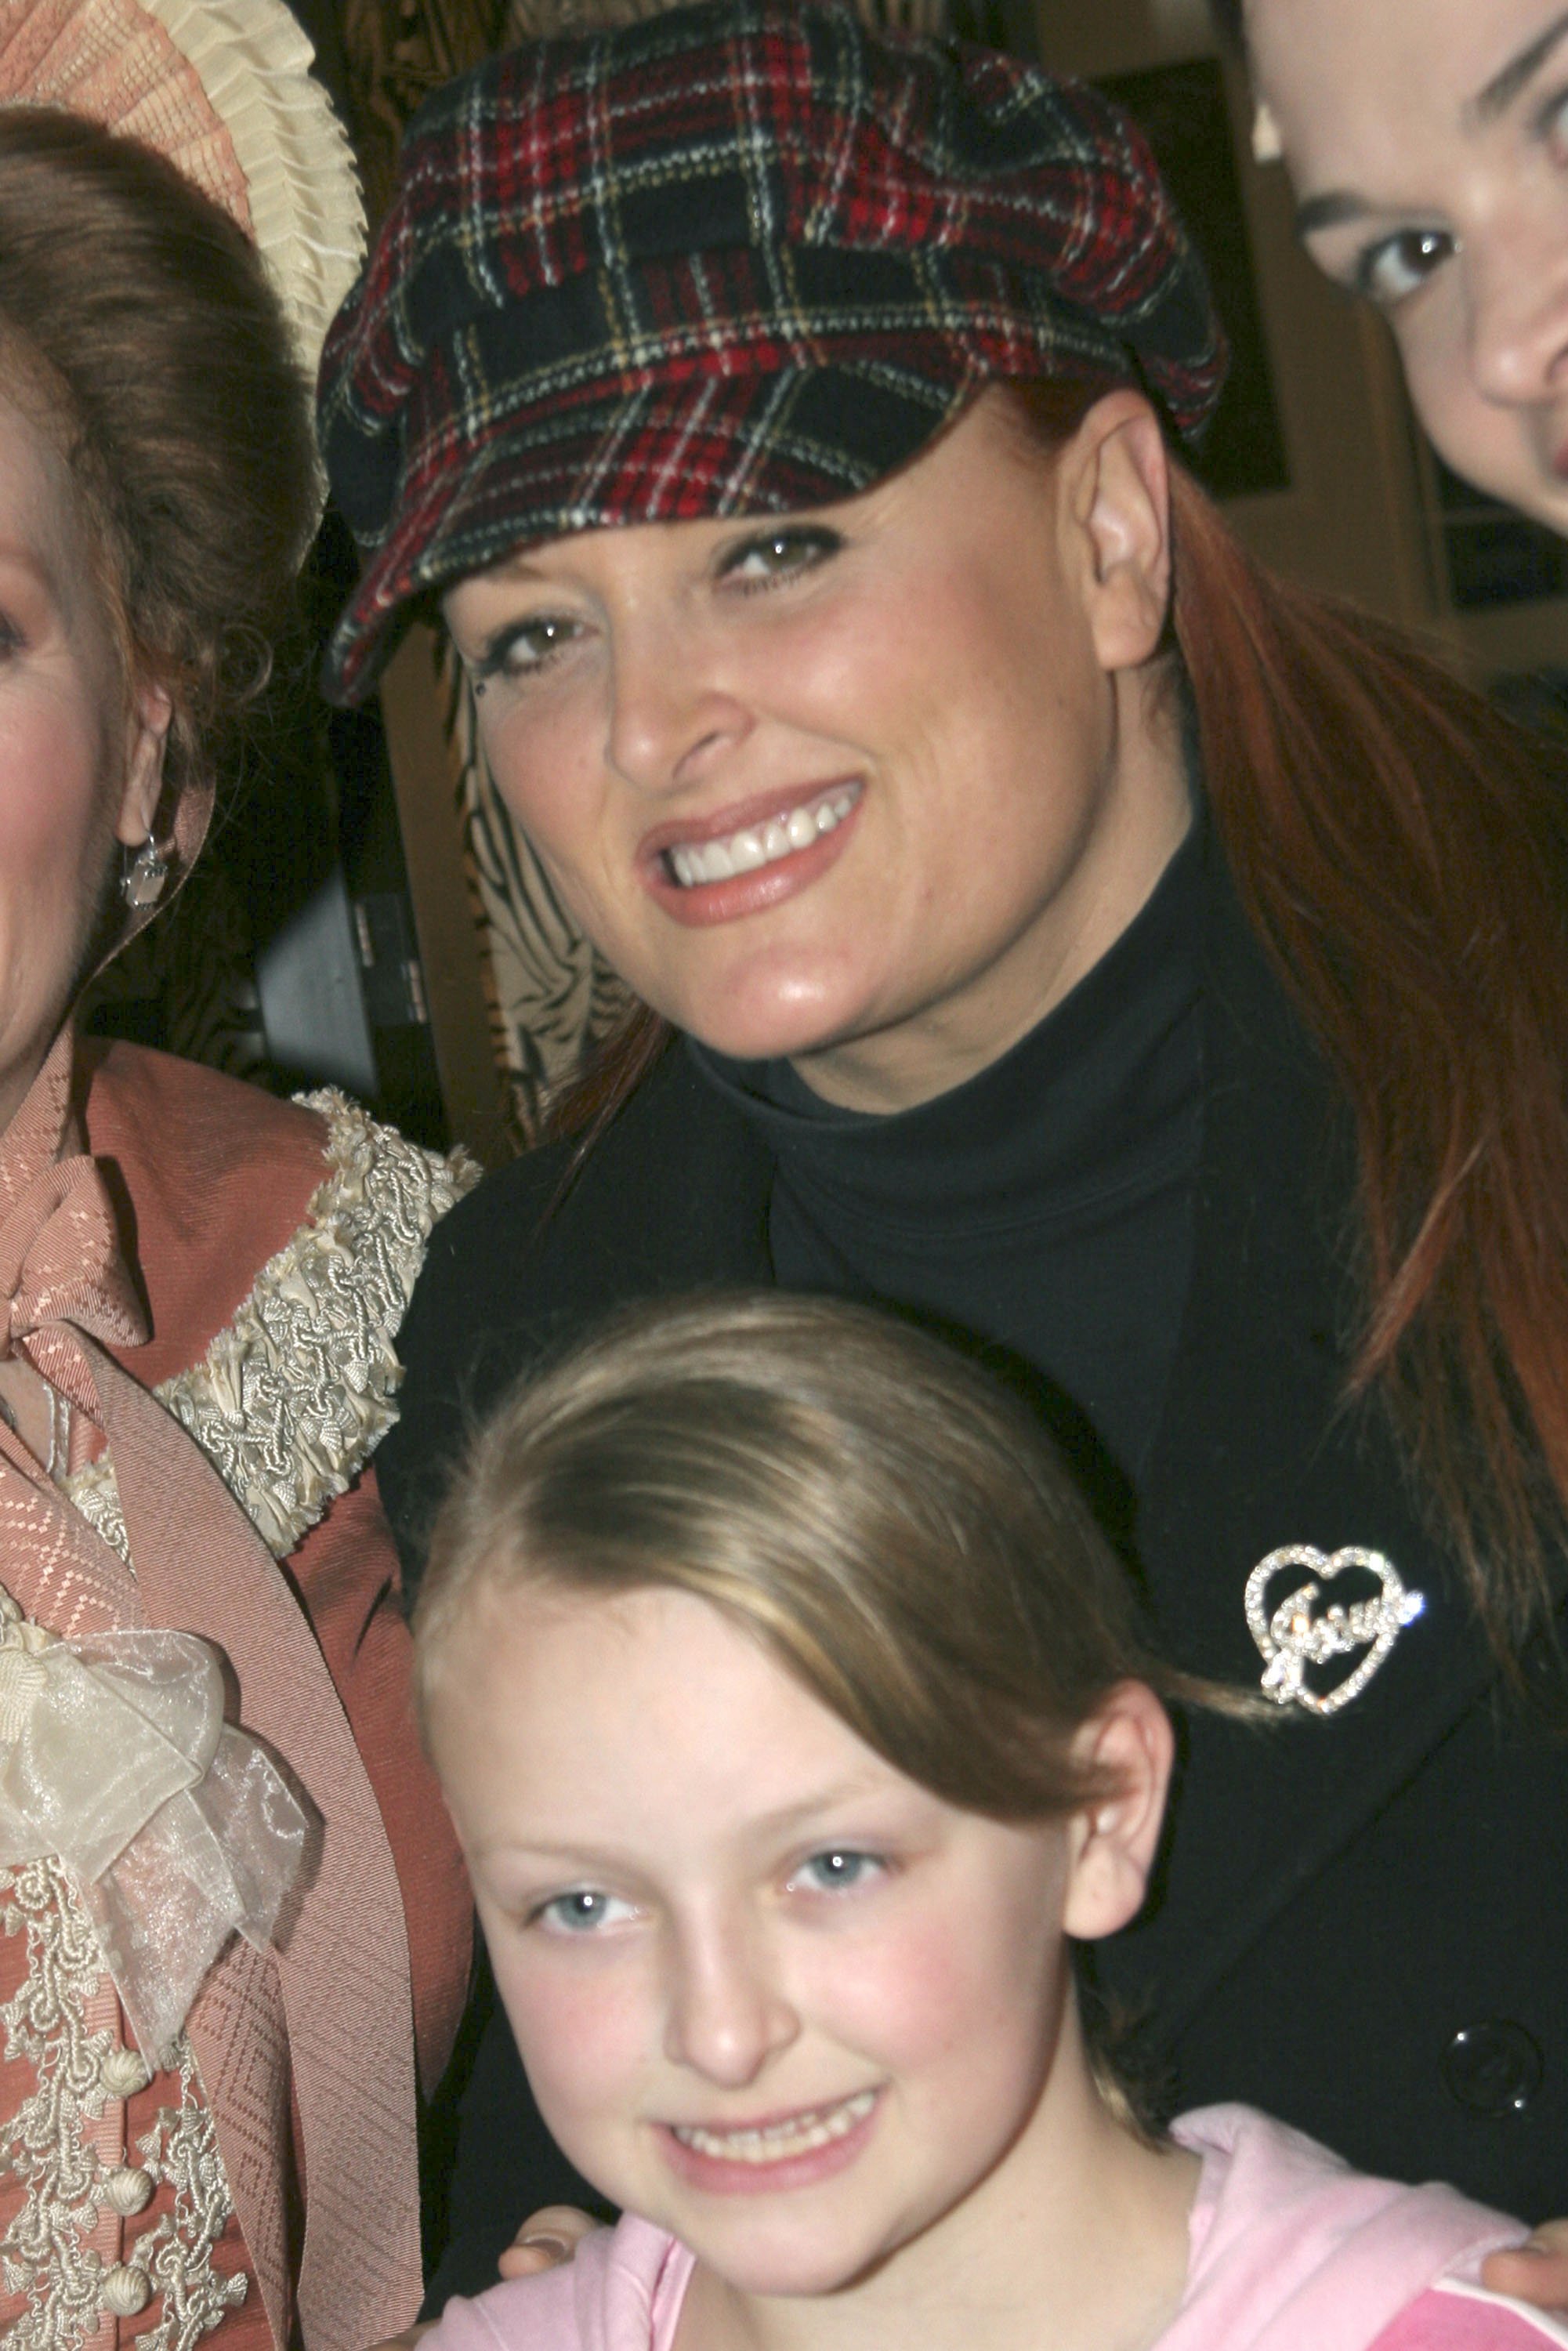 Wynonna Judd and daughter Grace Kelley backstage at "Little Women" on Broadway on March 23, 2005. | Source: Bruce Glikas/FilmMagic/Getty Images